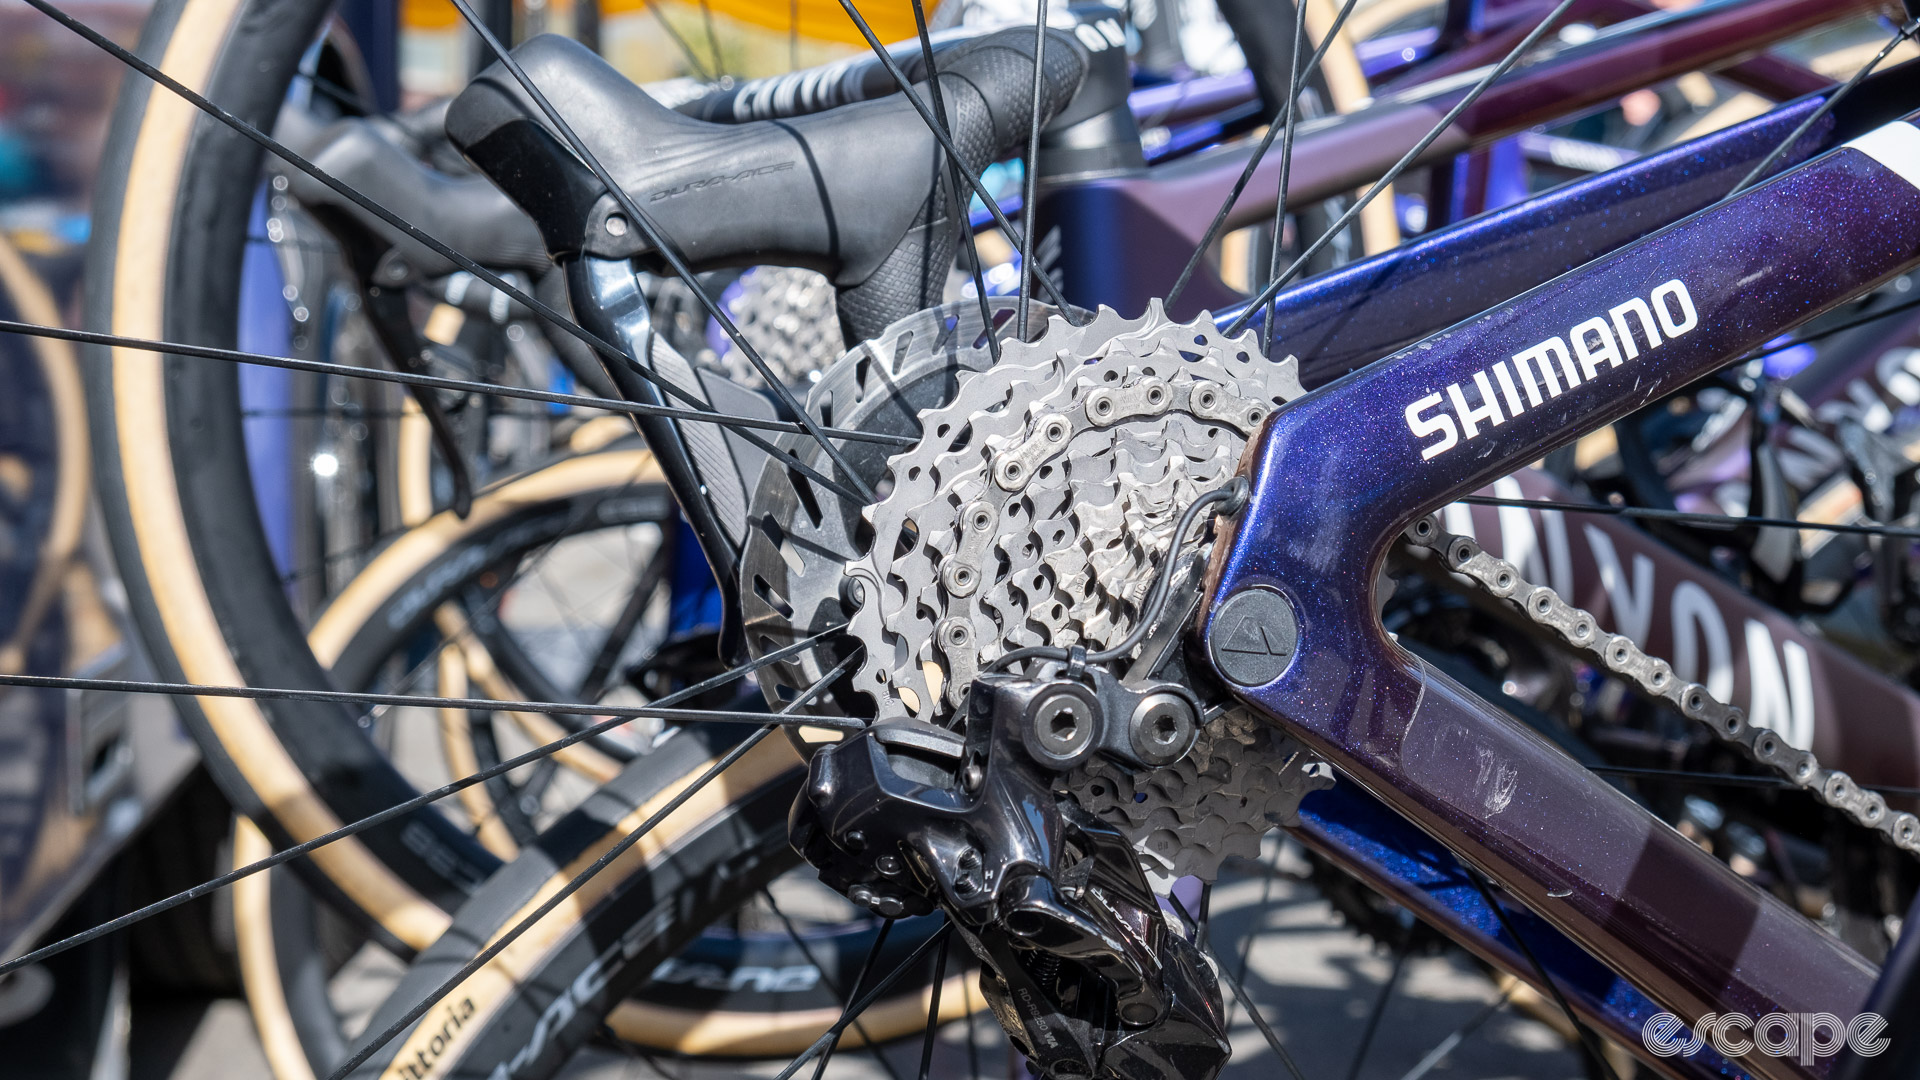 The image shows a Shimano Dura Ace 11-34 cassette.